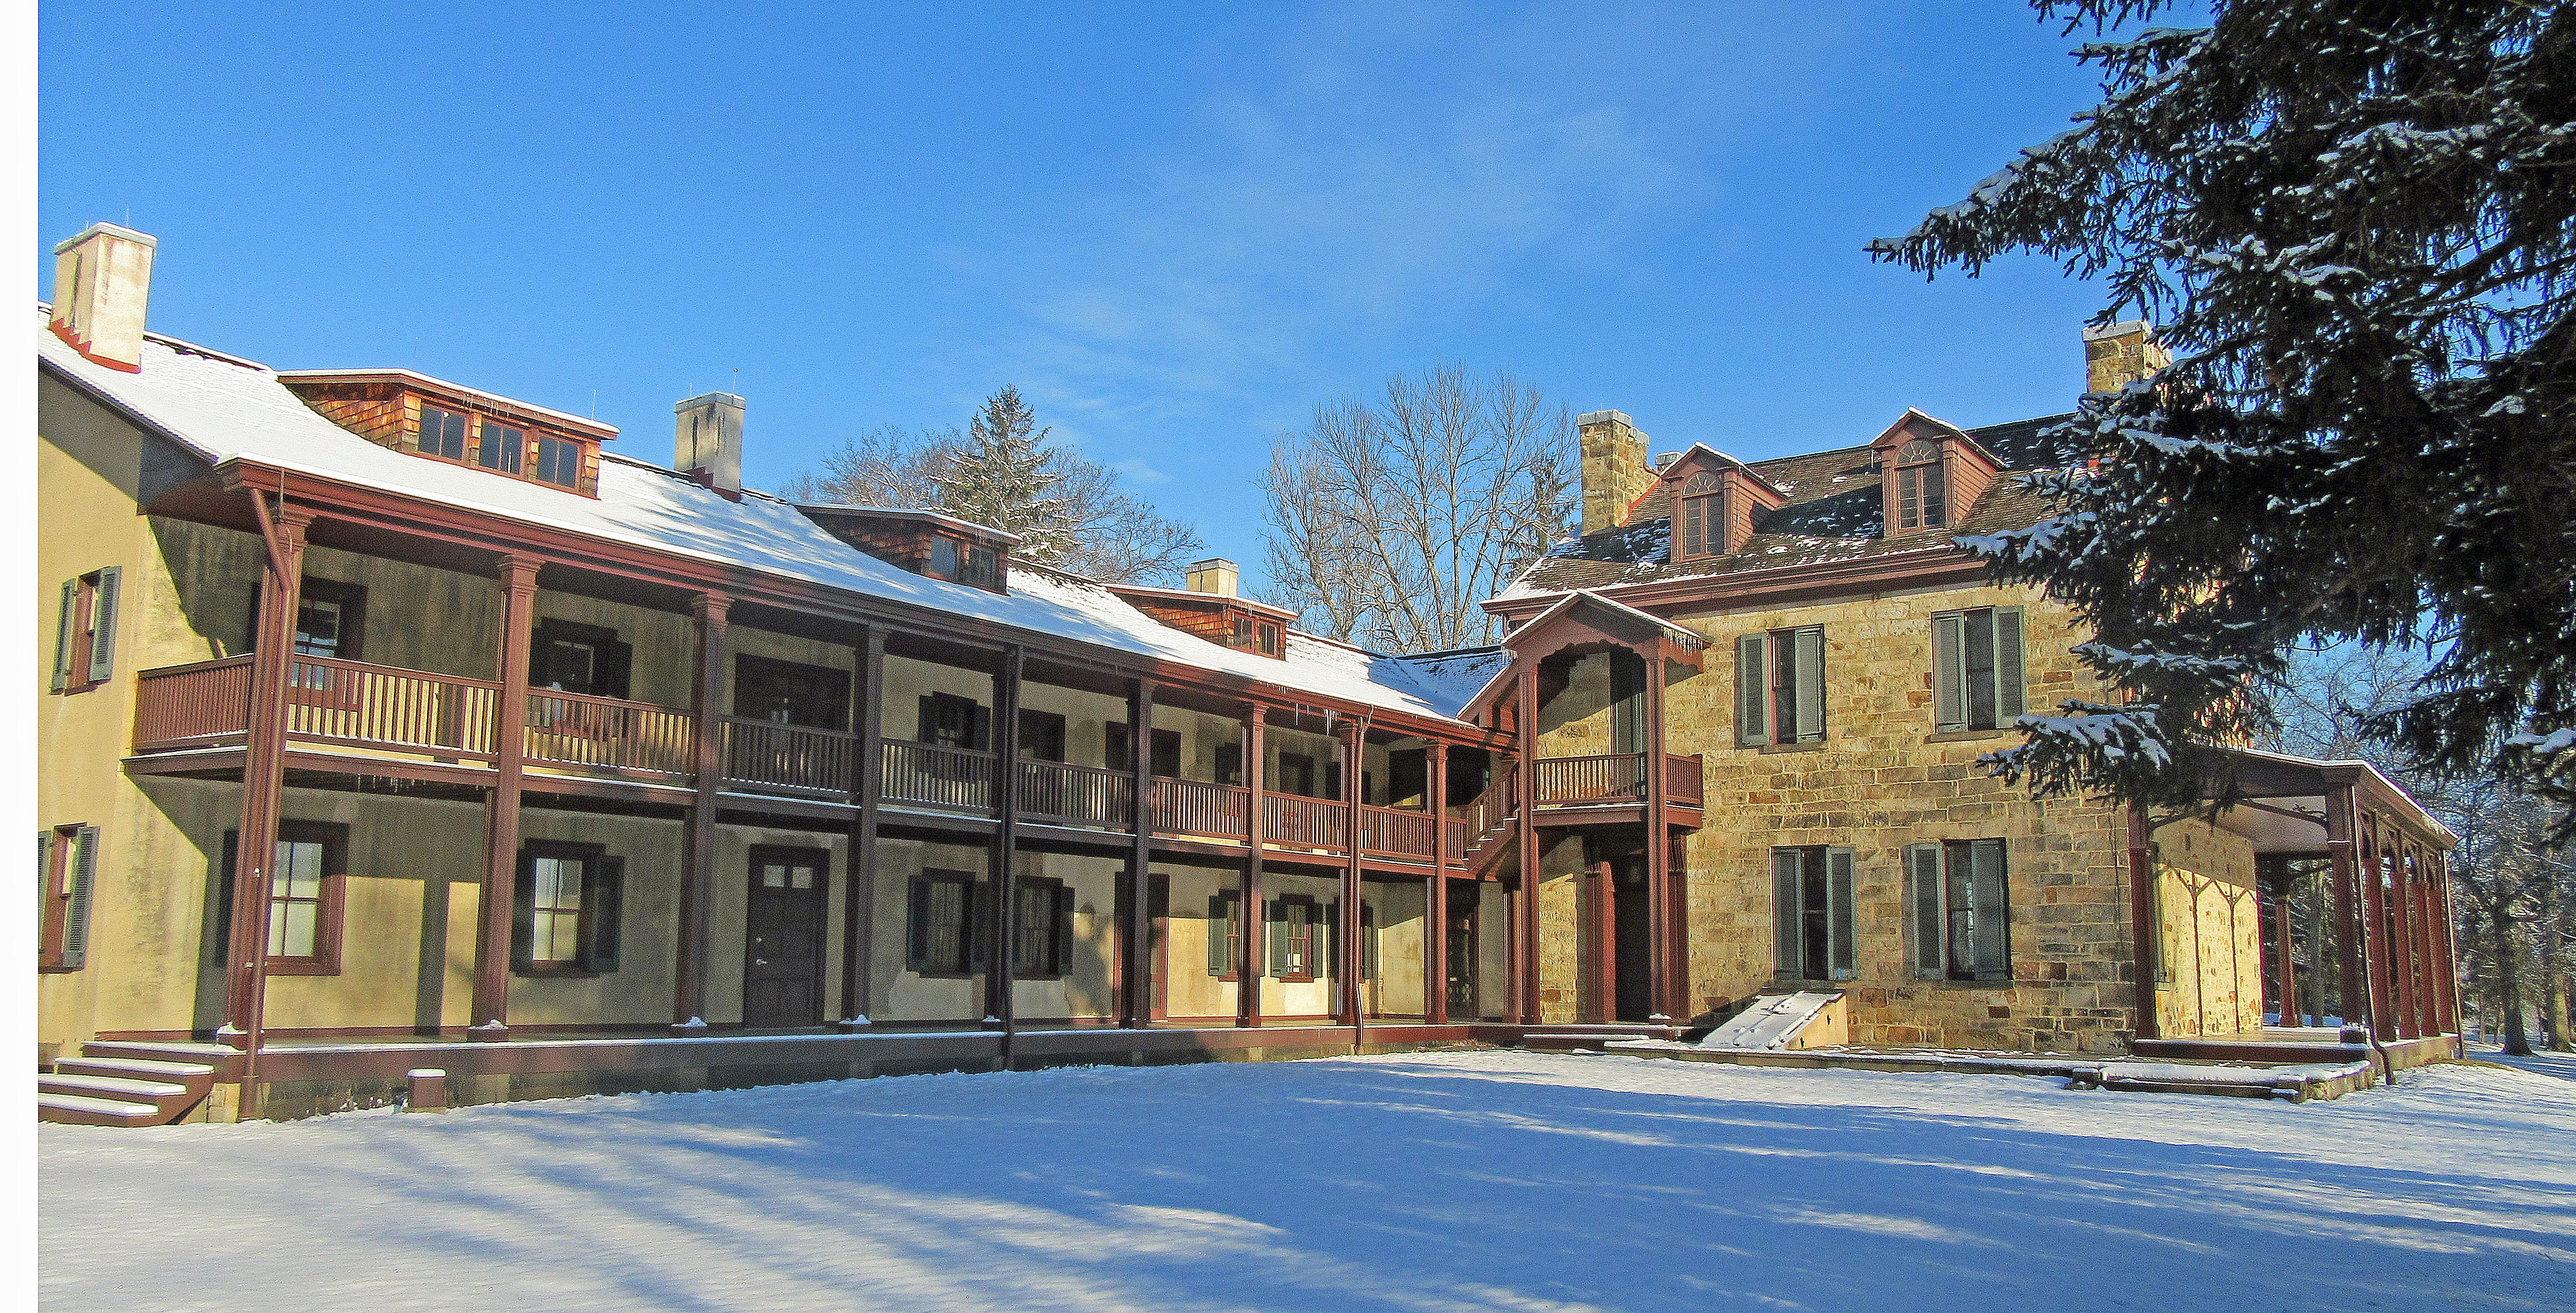 Gallatin House - Stone House and South Wing in snow with blue sky